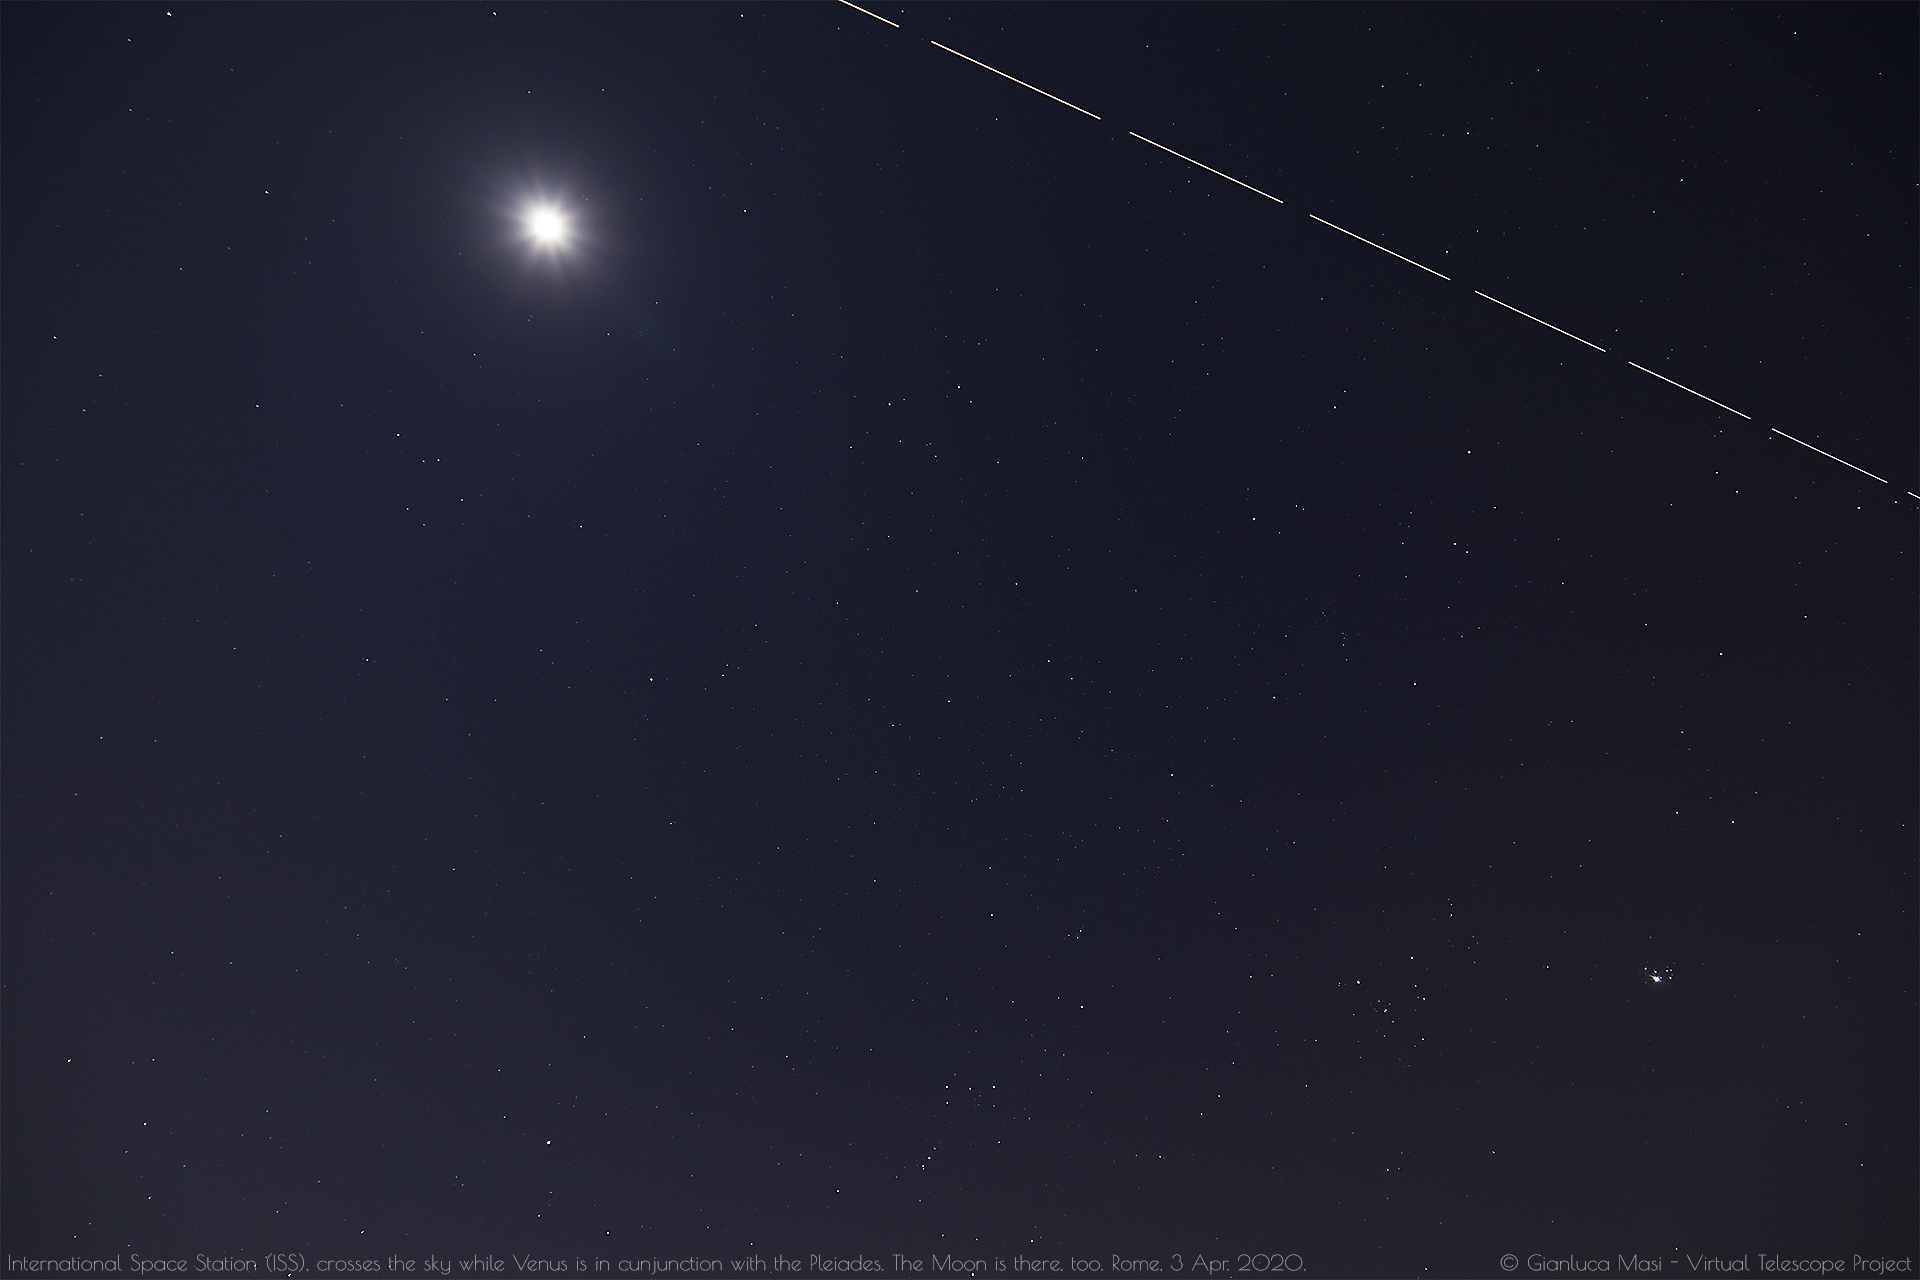 The Moon, the International Space Station and the conjunction between Venus and the Pleiades - 3 Apr. 2020